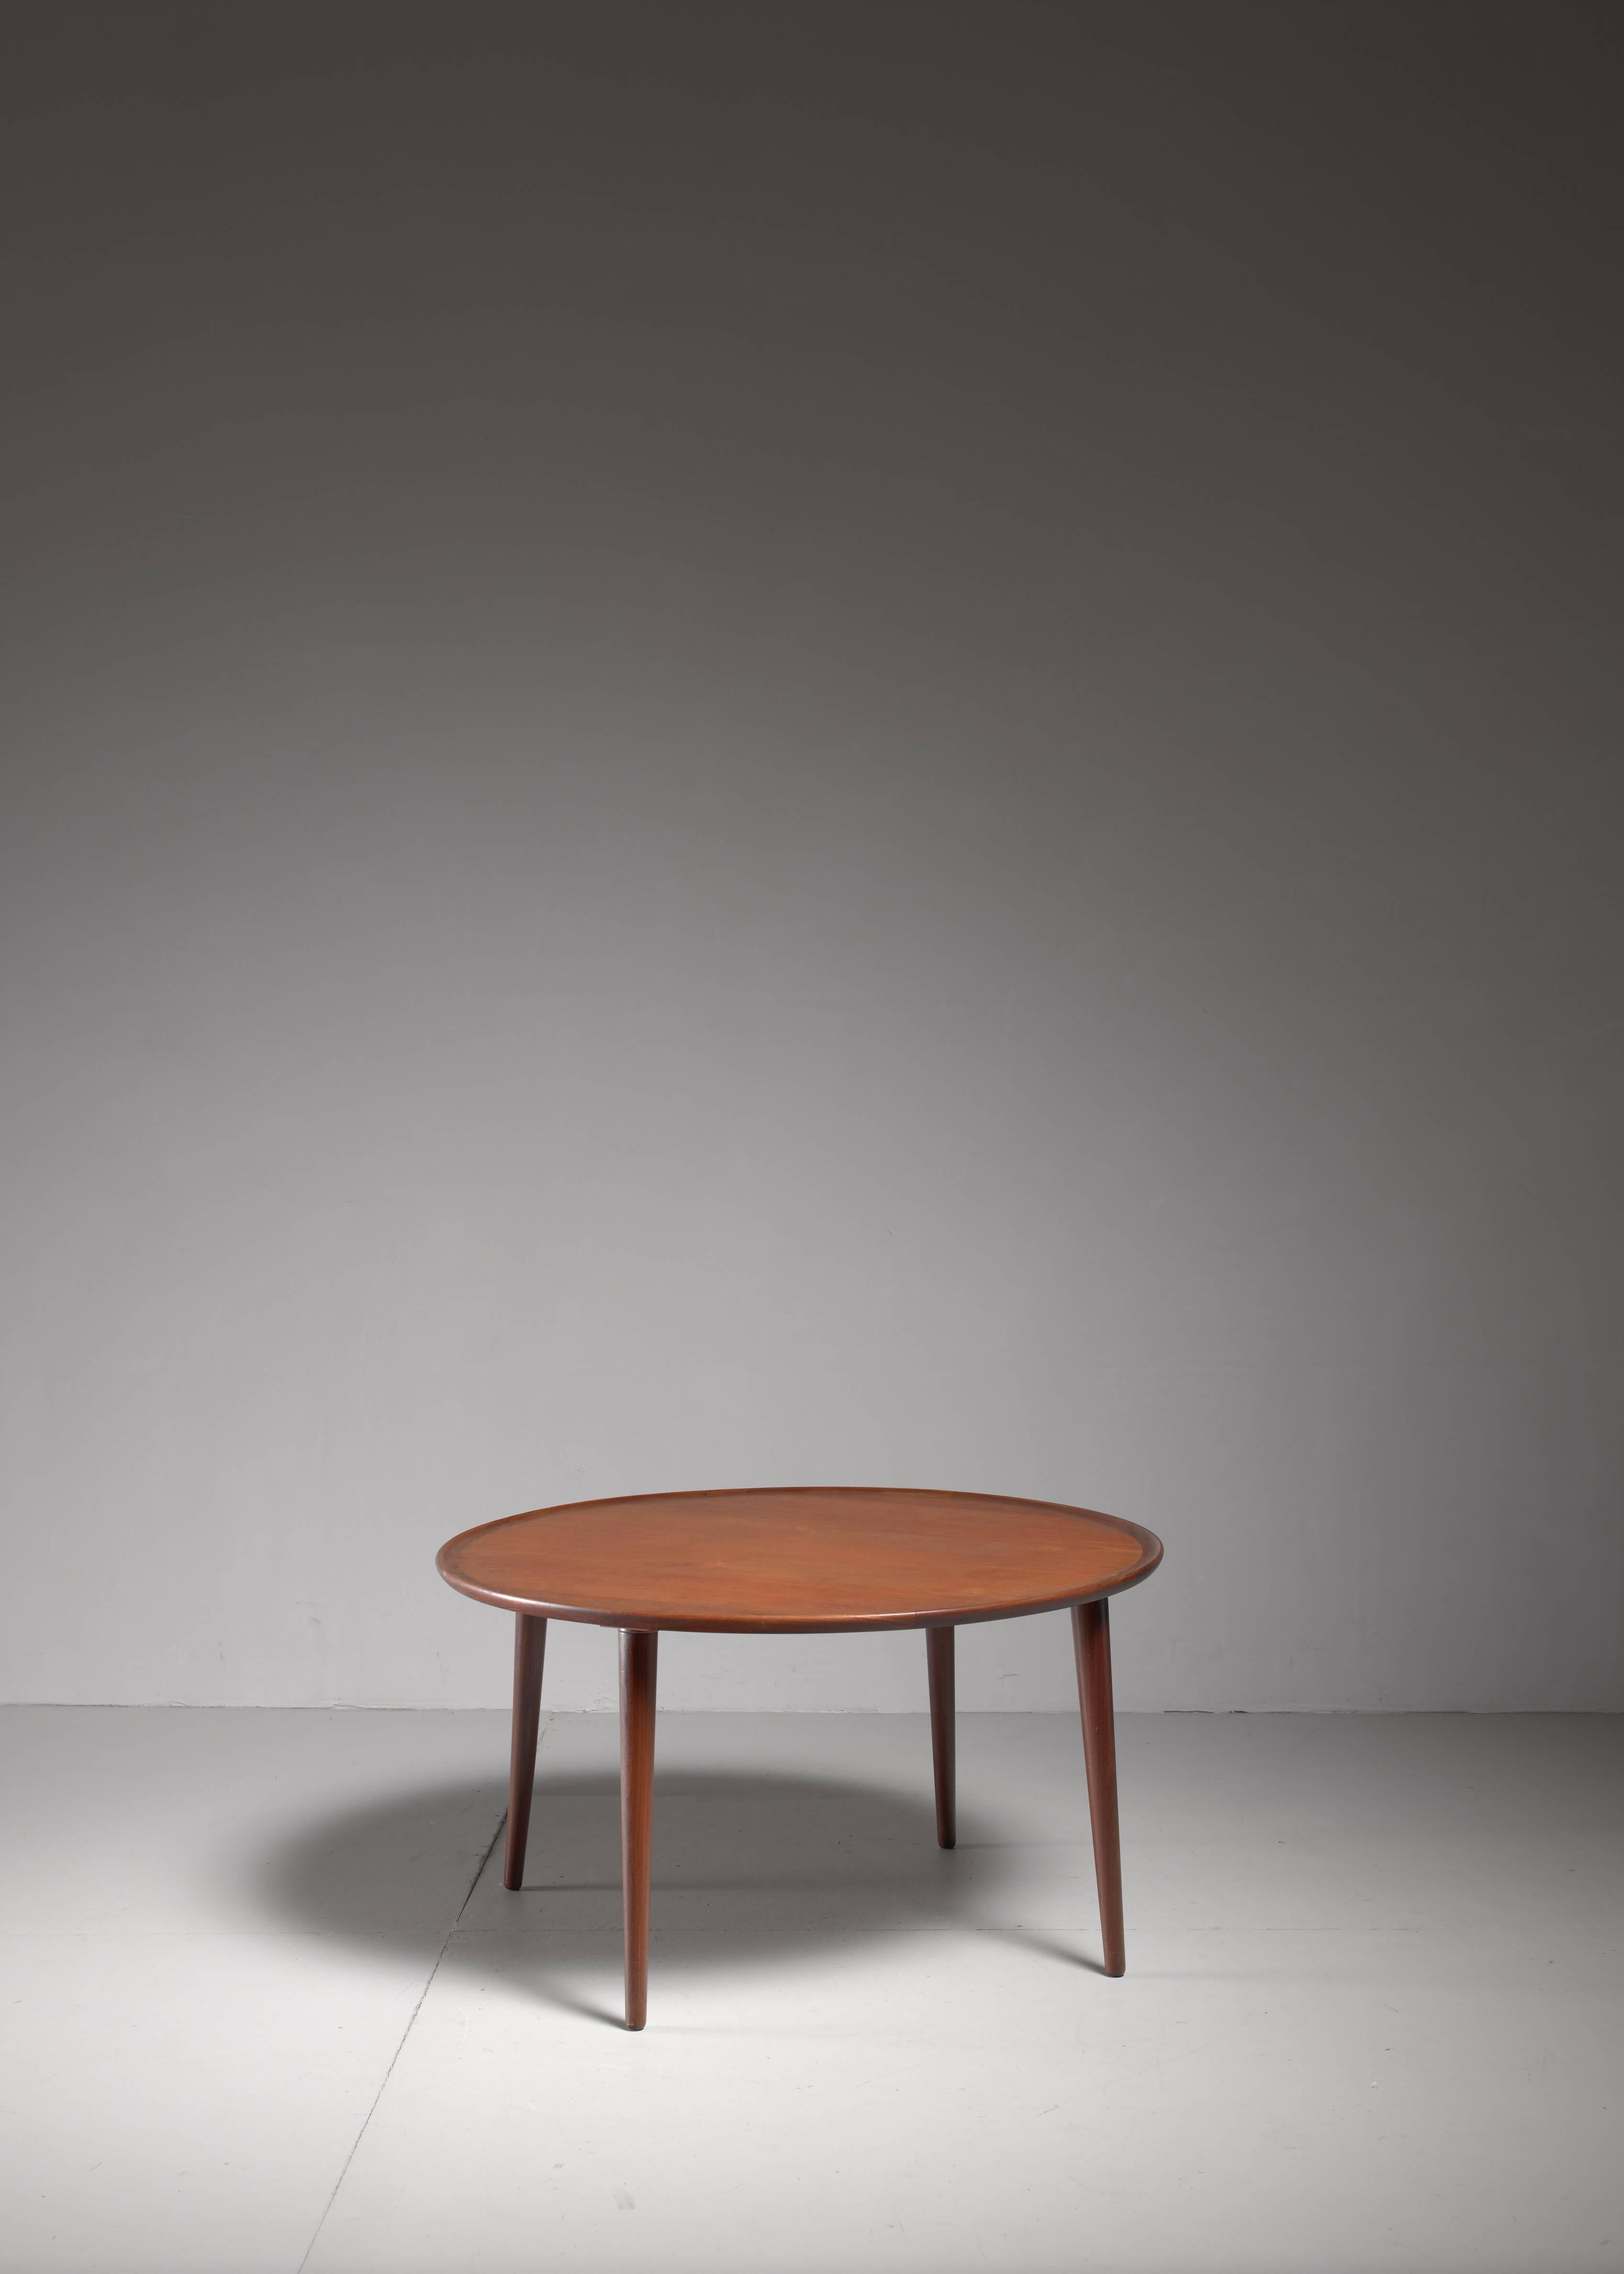 A round teak coffee table by a yet unrevealed Danish cabinet maker. The small upward edges shows the skillfulness of the maker. At first sight it resembles the work of Peter Hvidt, but this is of another quality.

 The light tapering legs enhance